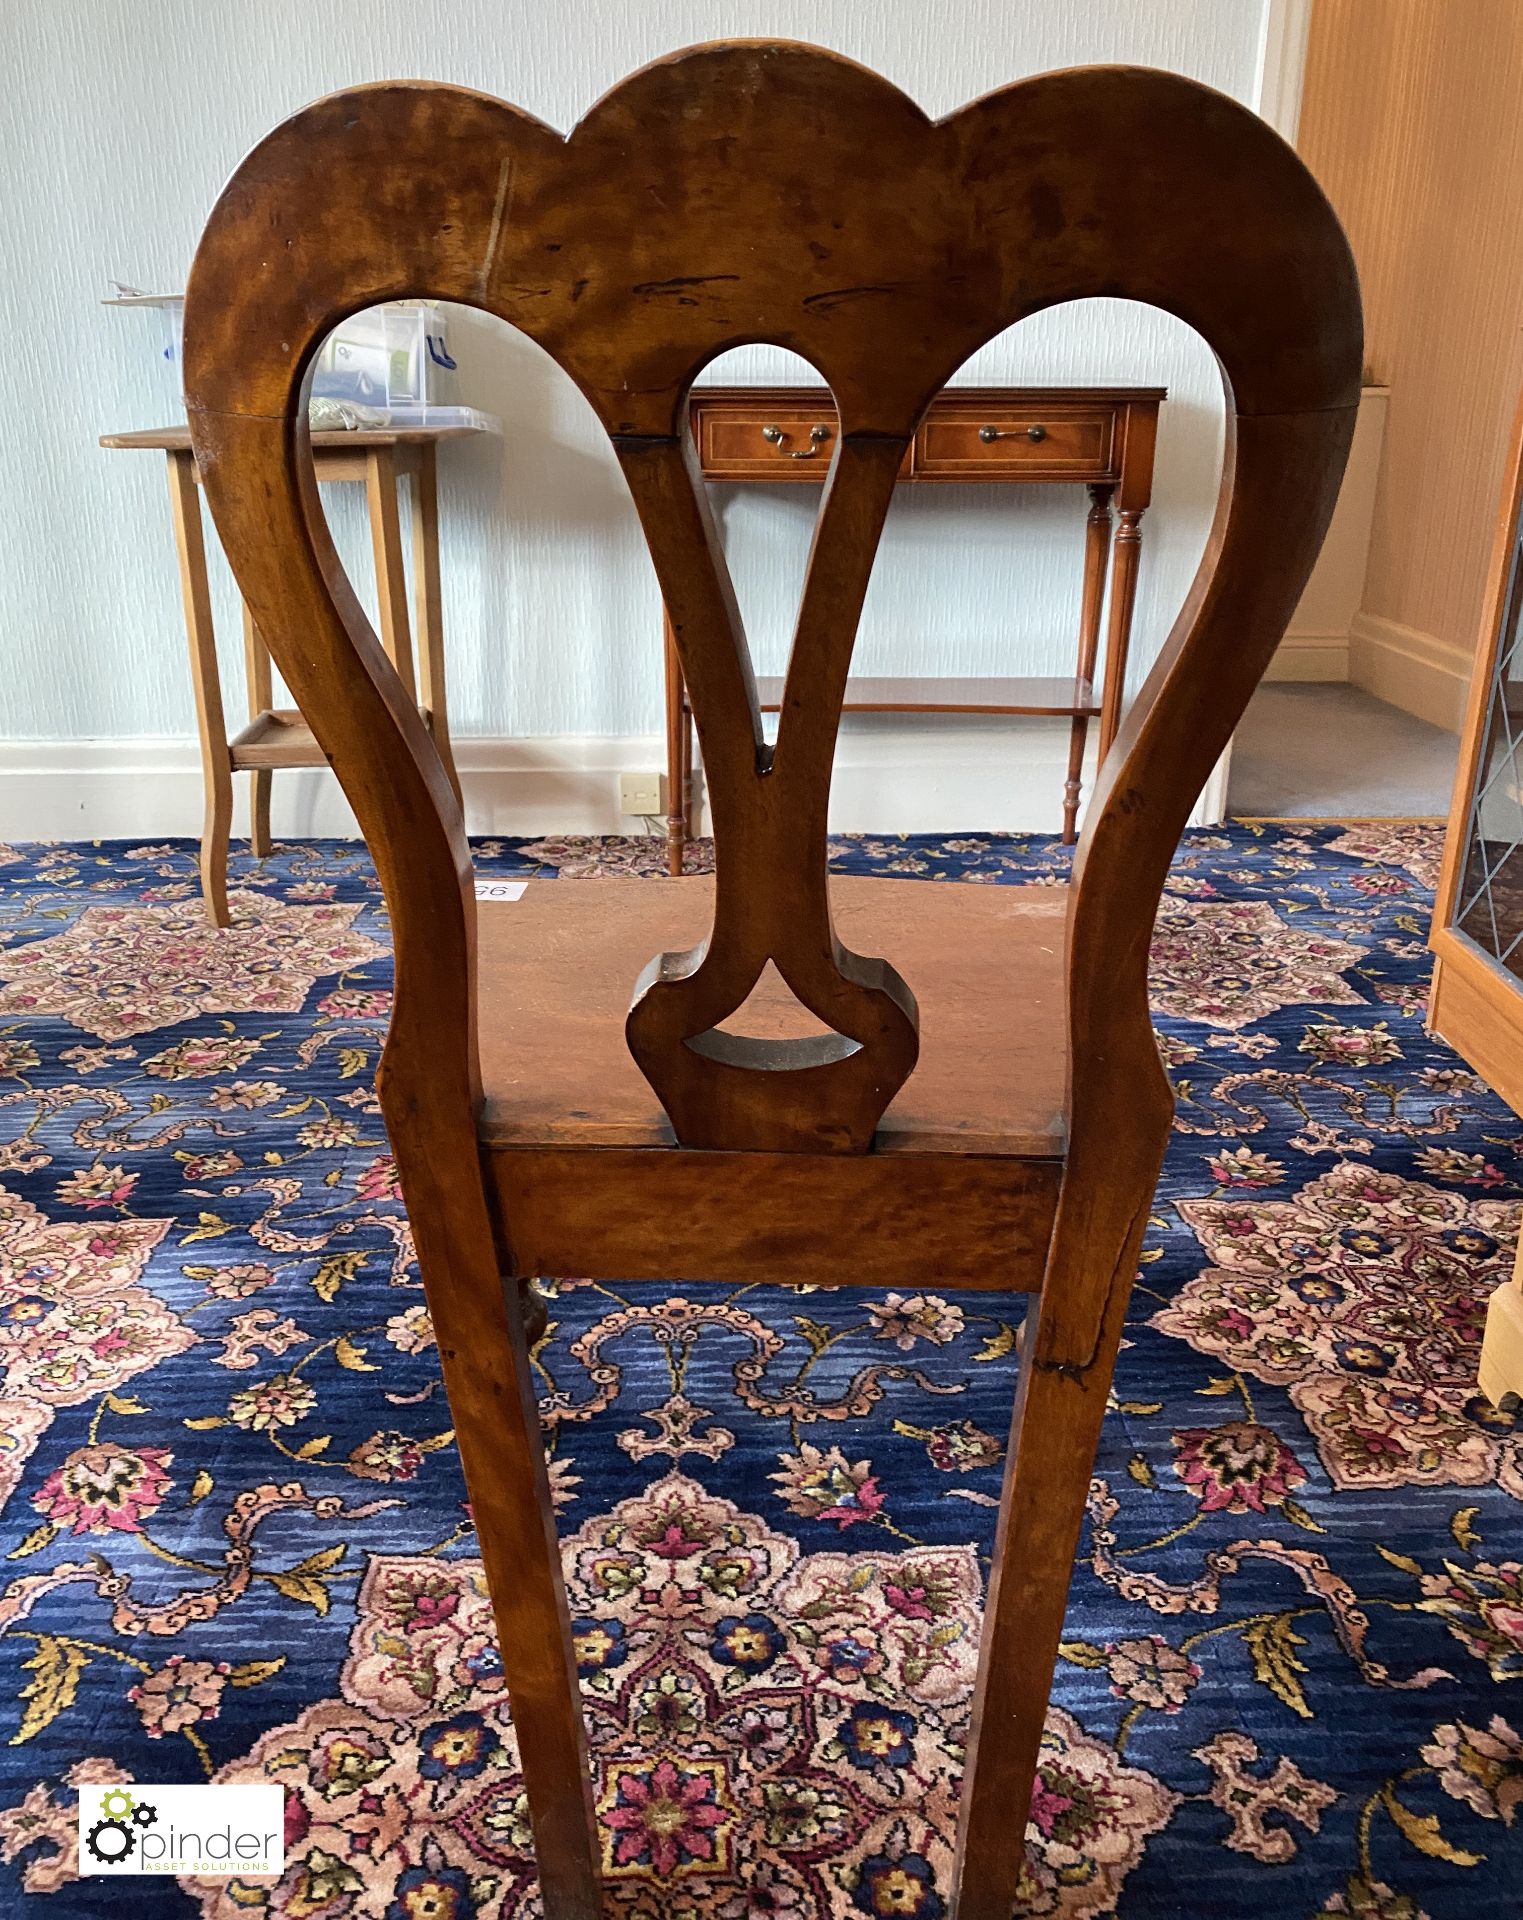 Antique Chair (location: Temple Newsam / collection: Tuesday 8 March between 9.30am and 12noon) - Image 3 of 3